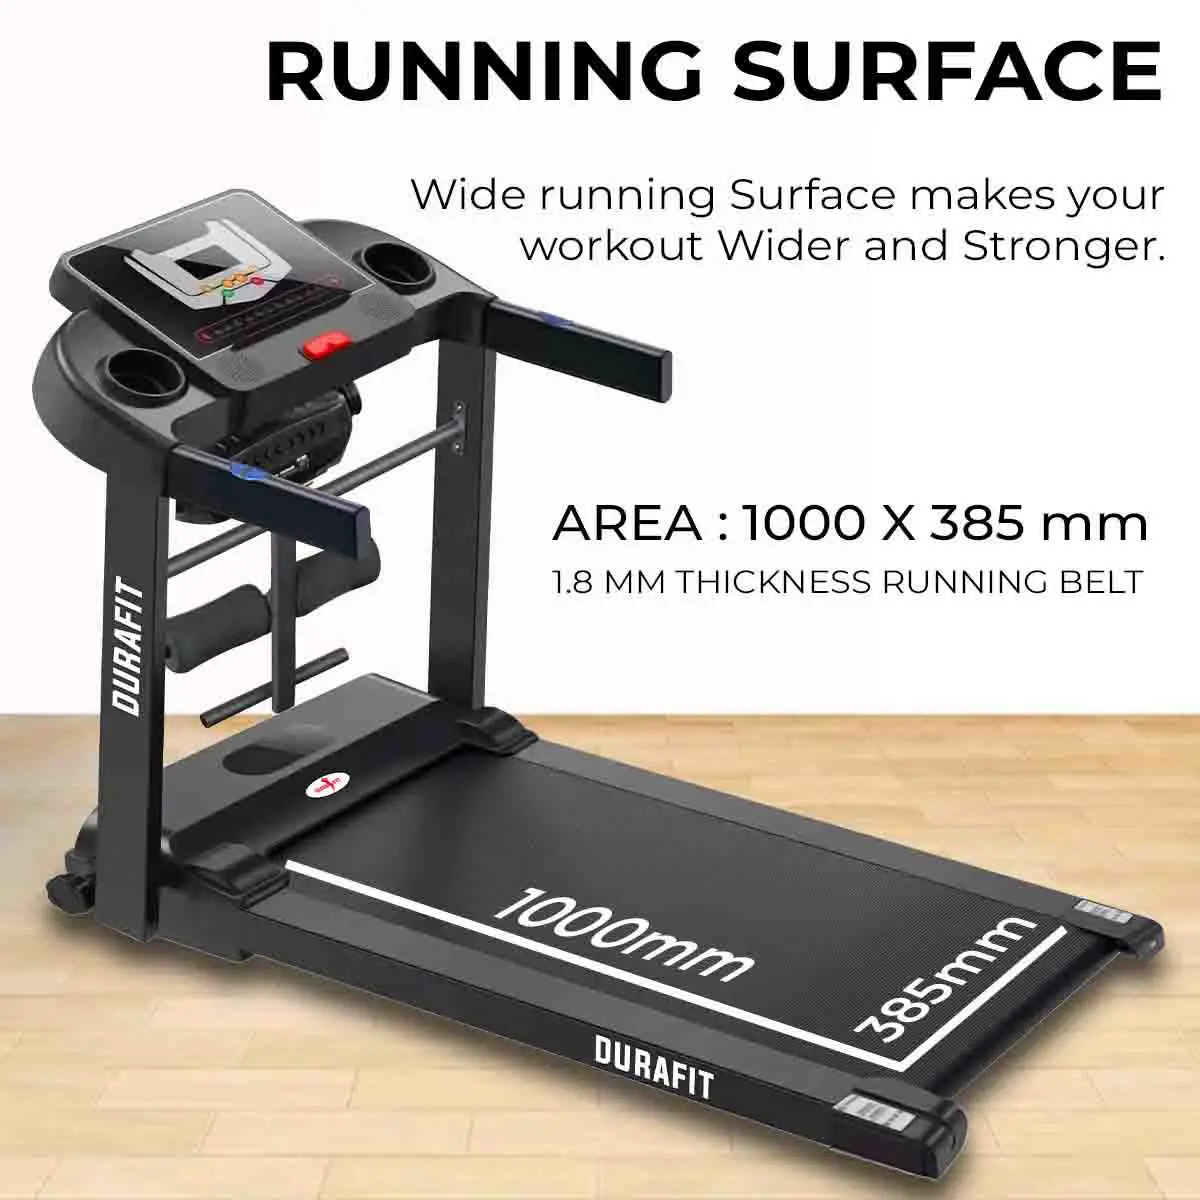 Durafit Spark Multifunction Treadmill with Wide Running Area